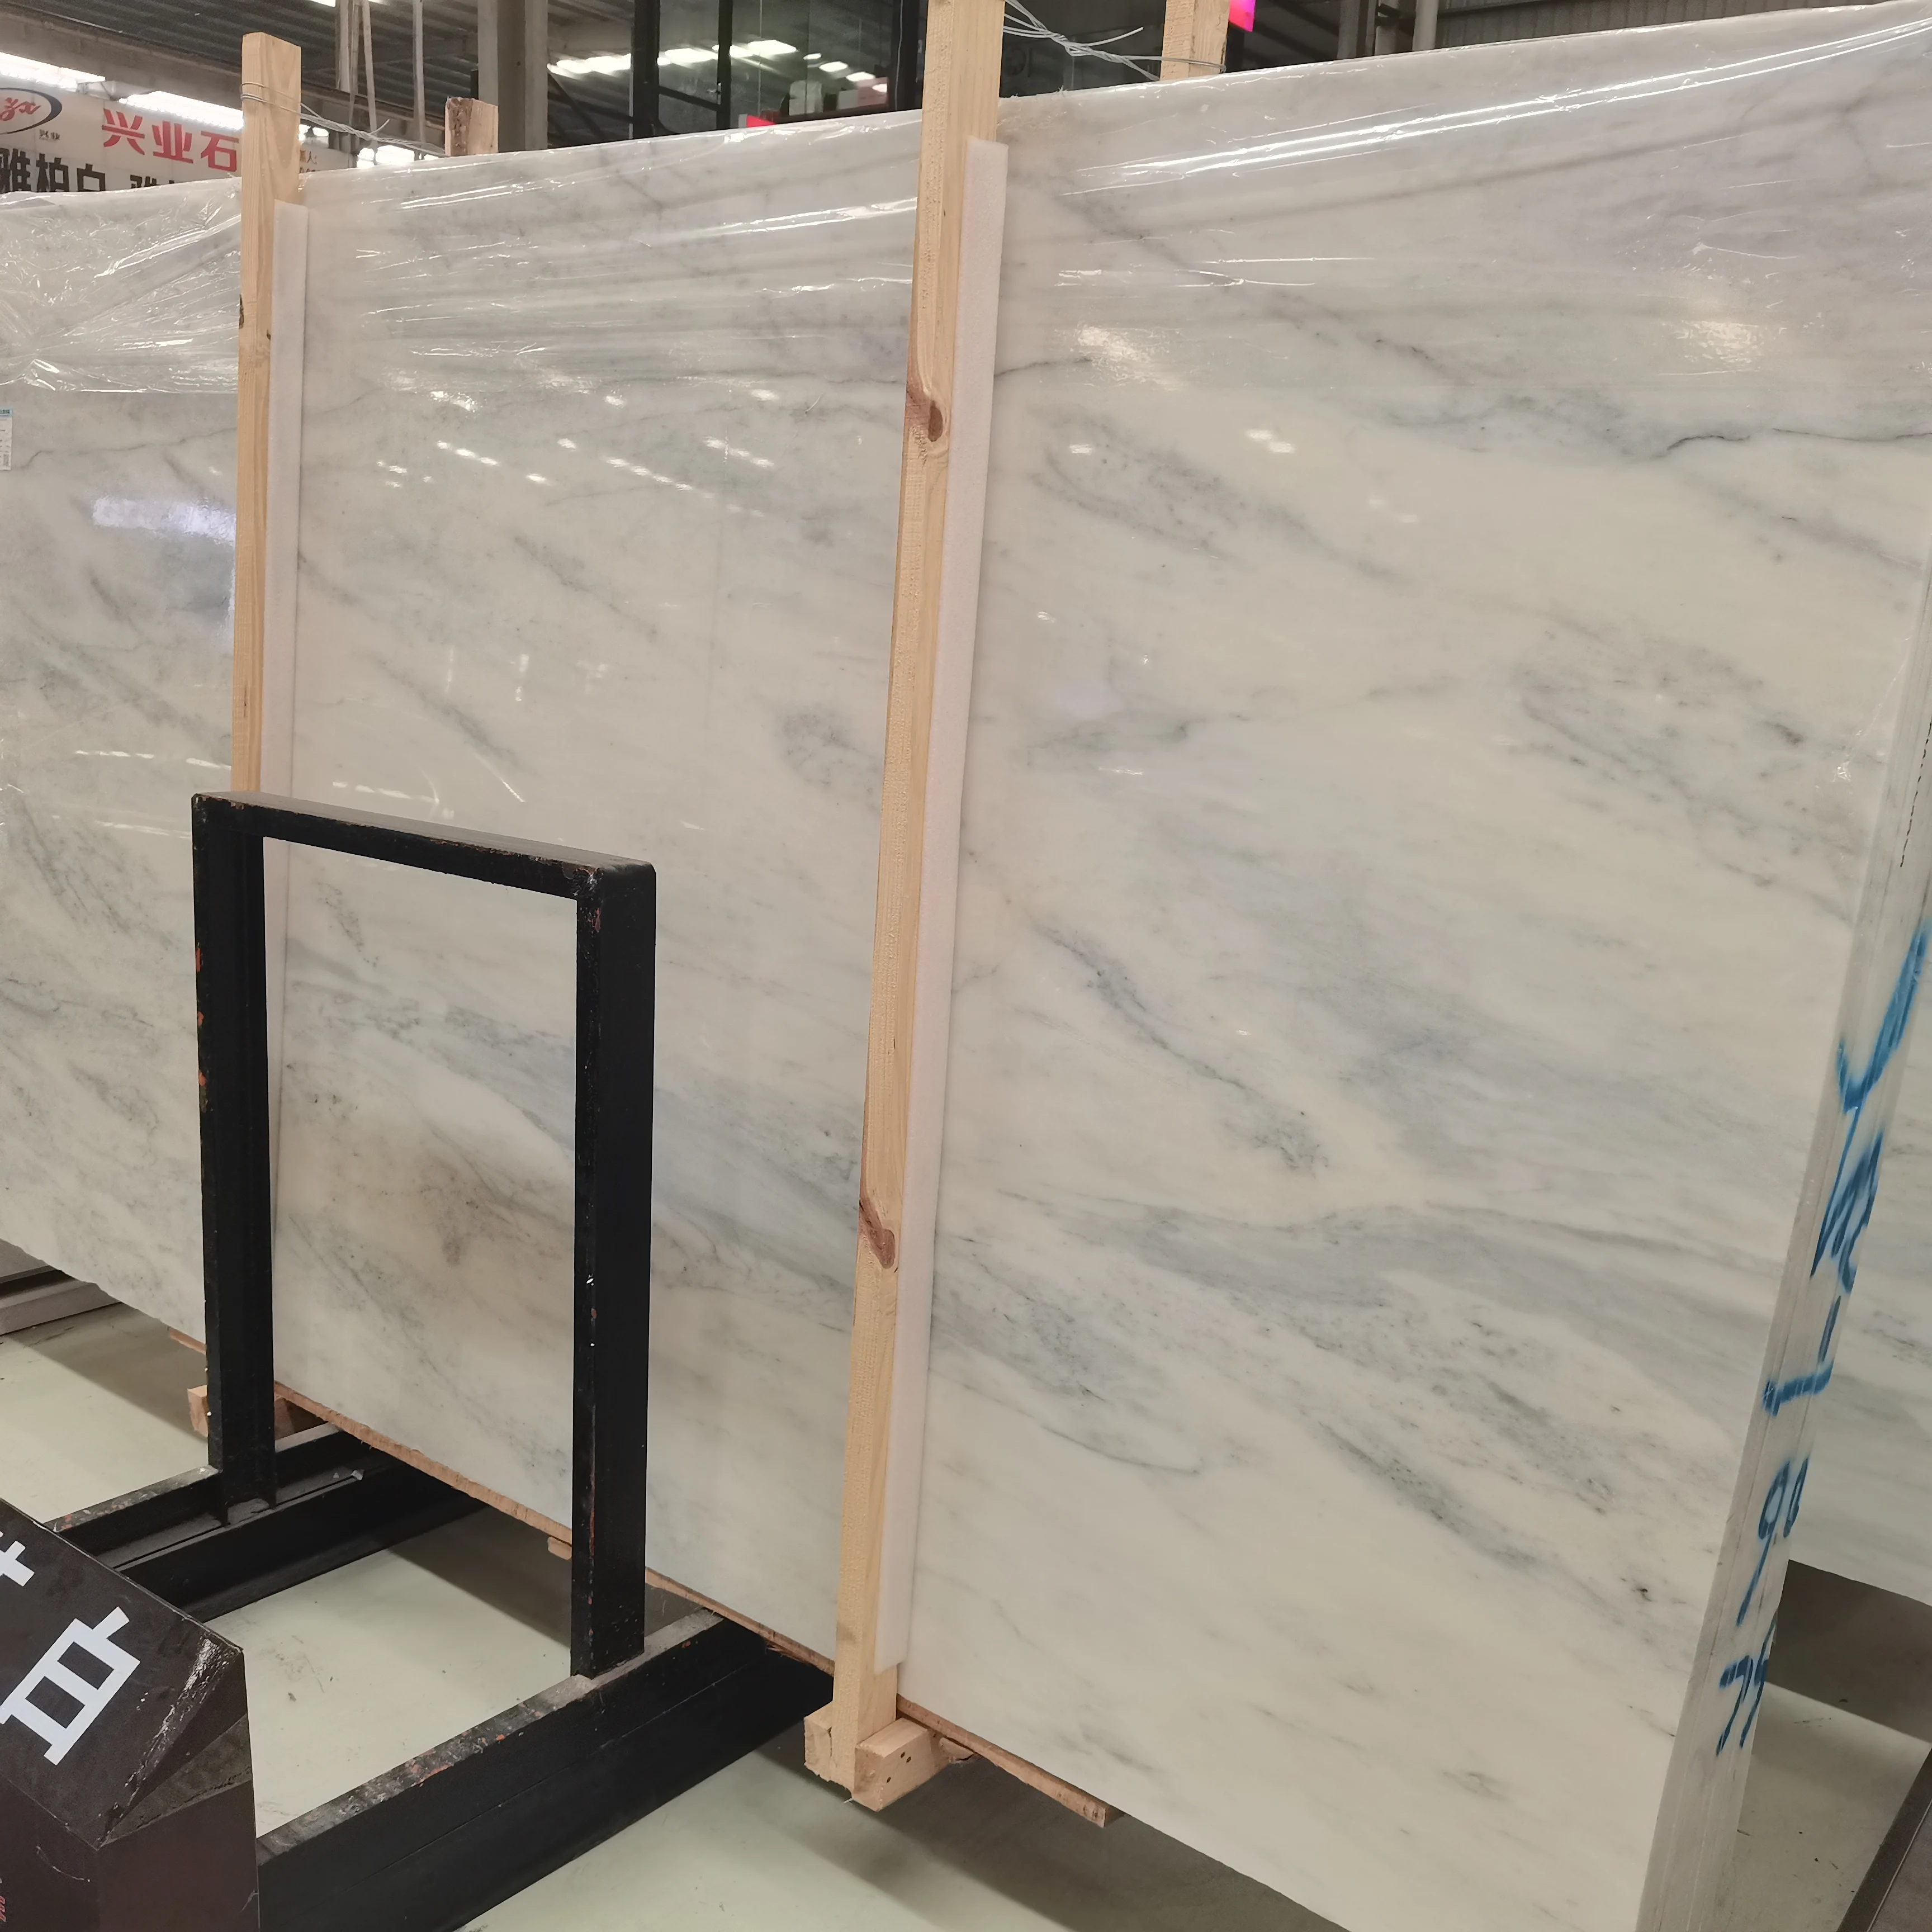 Snow Flake White marble slab Natural stone glazed interior wall Tile white marble for countertop - uncategorized, marble-slabs